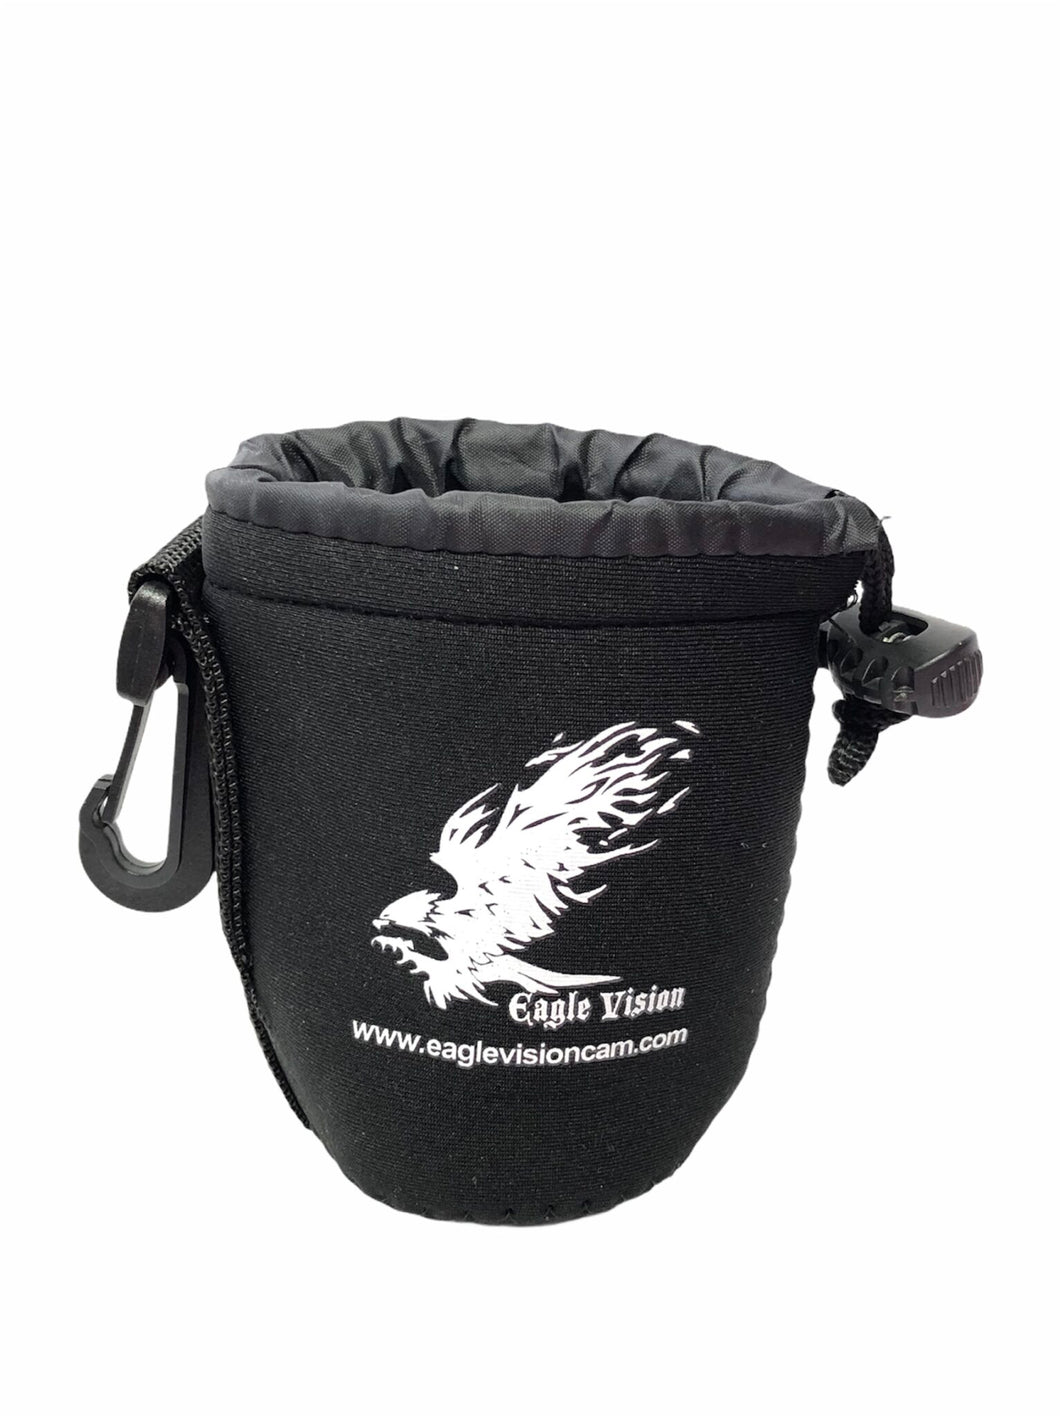 Eagle vision soft carry pouch